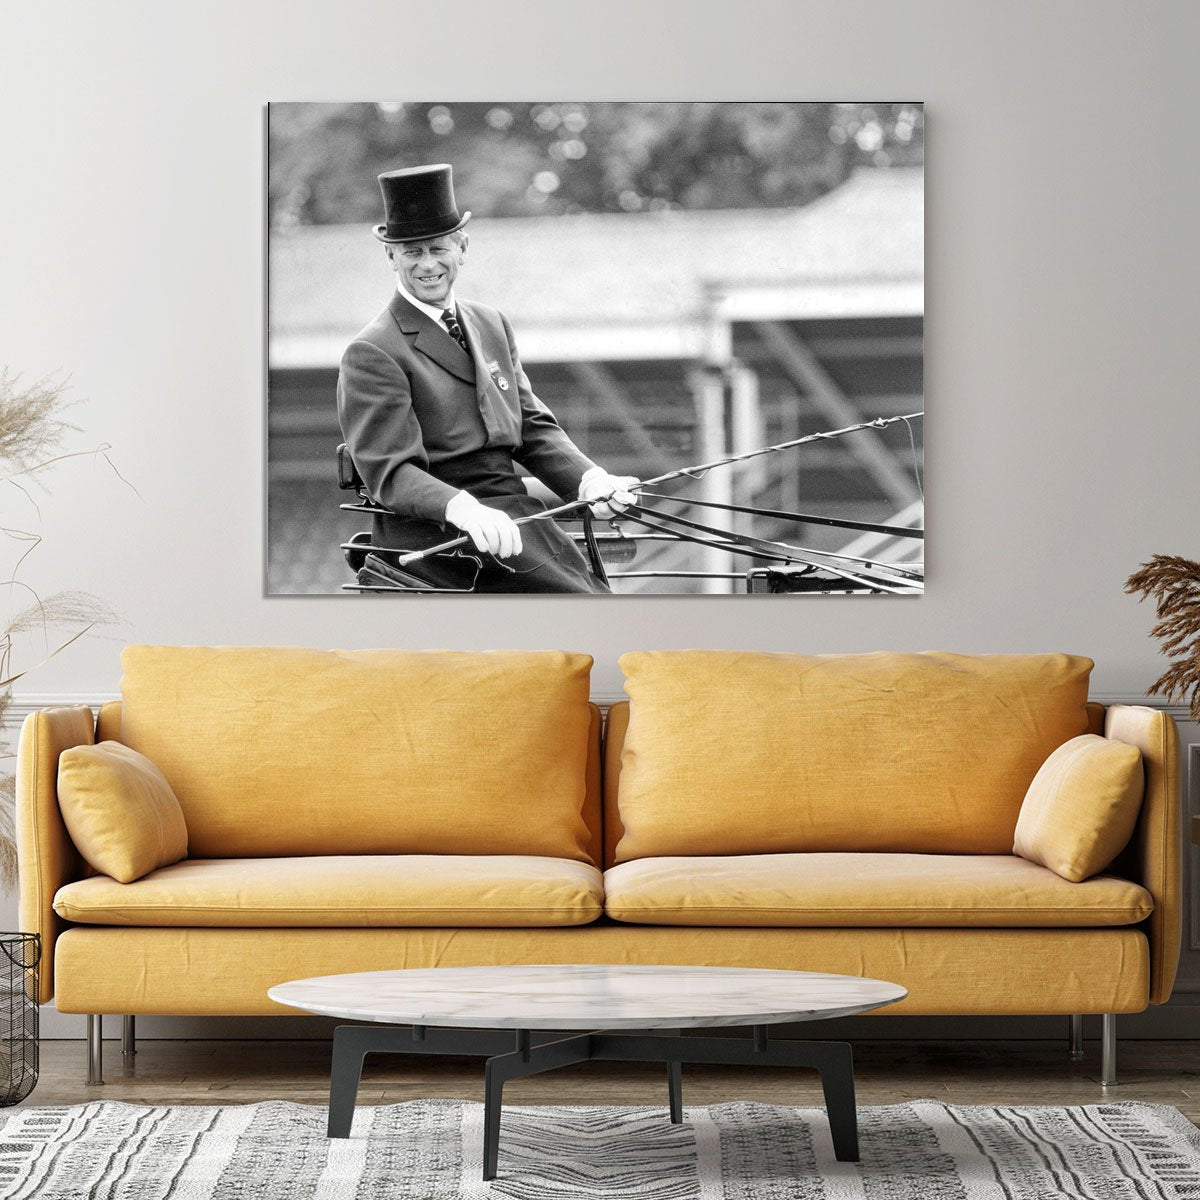 Prince Philip driving a carriage during a race at Ascot Canvas Print or Poster